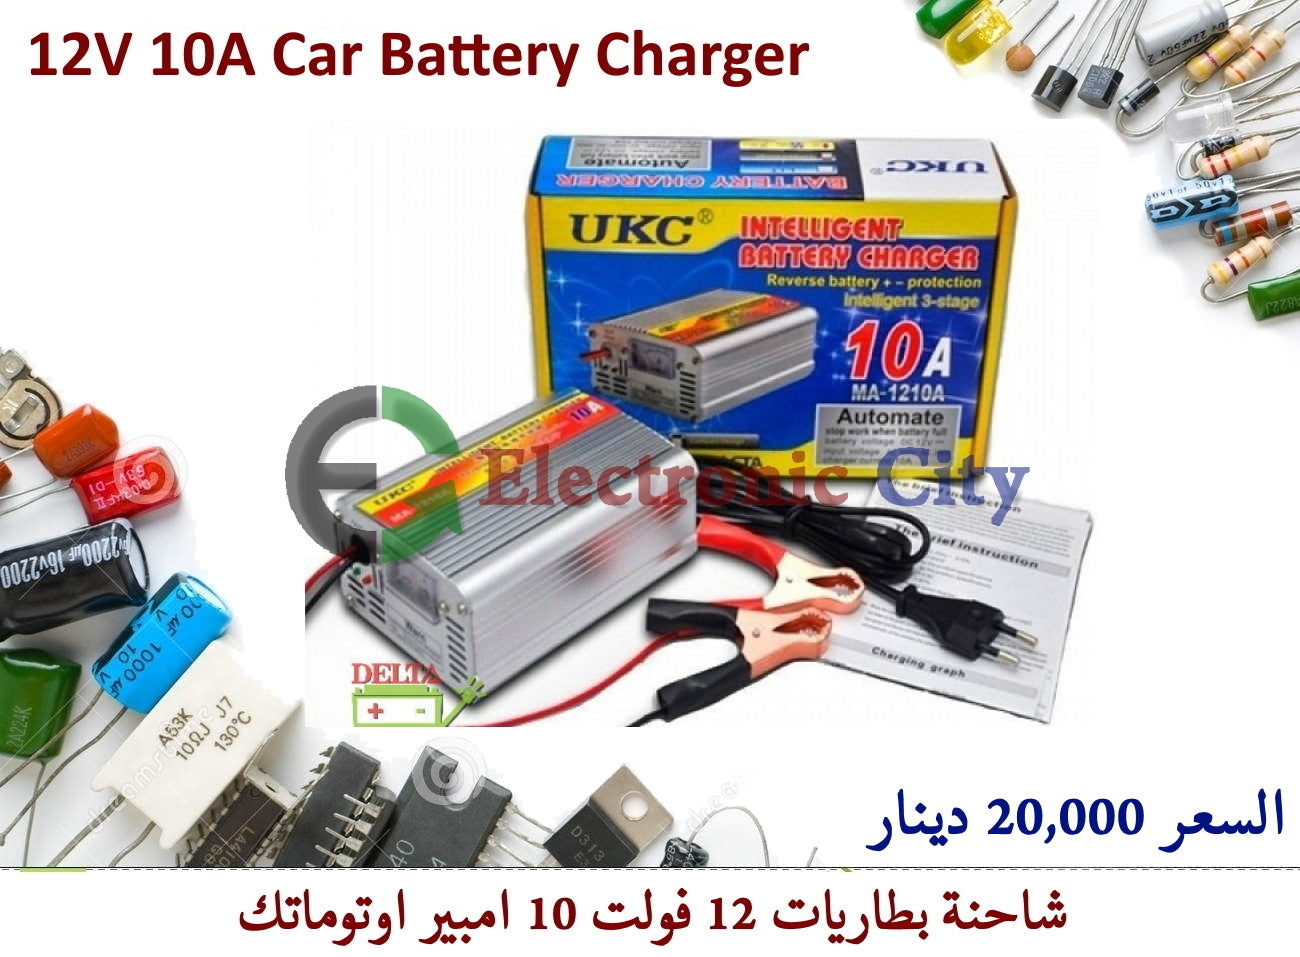 12V 10A Car Battery Charger